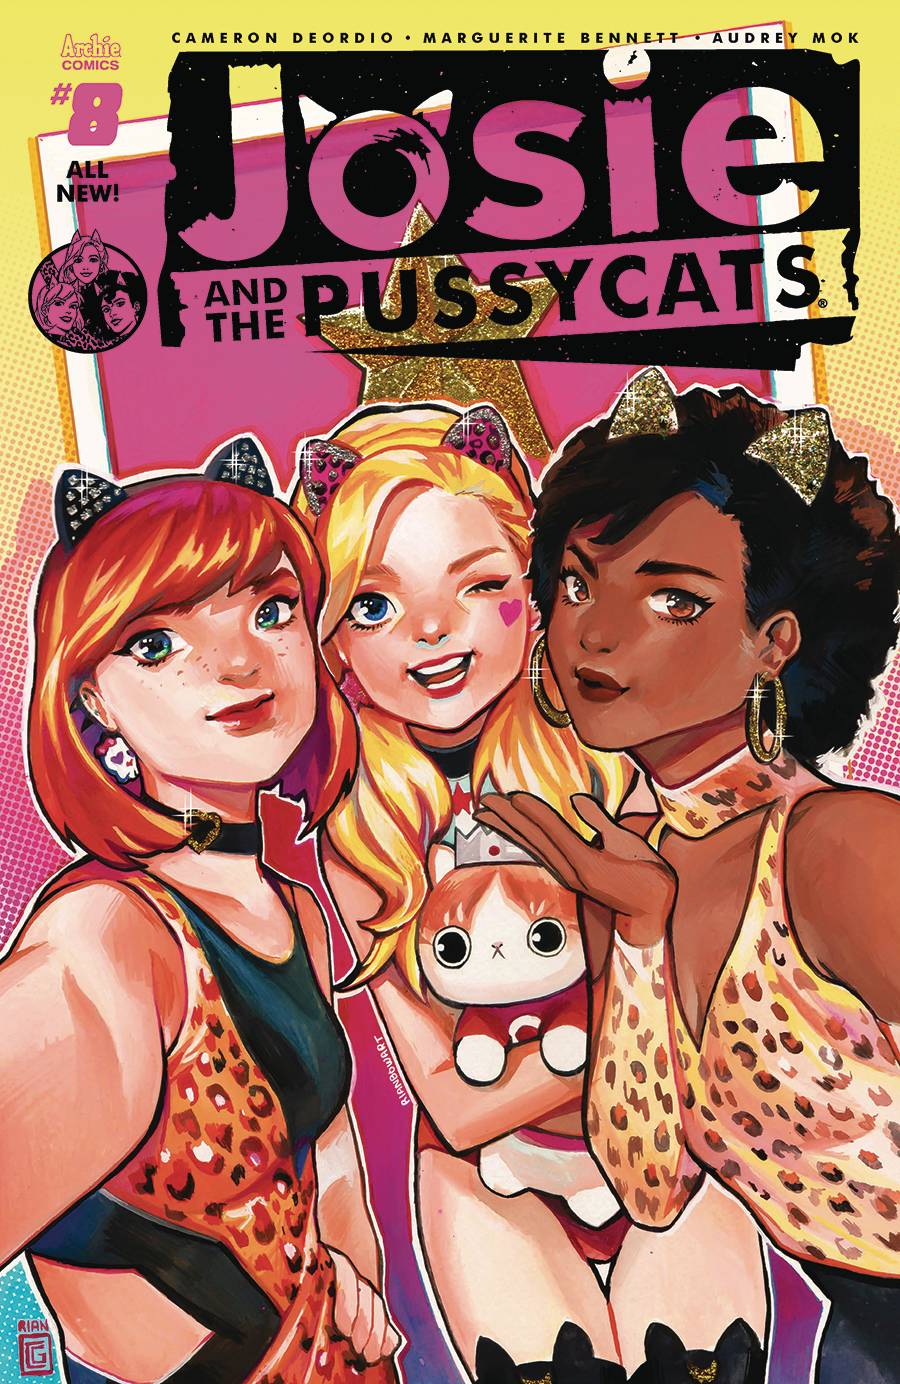 JOSIE AND THE PUSSYCATS#8